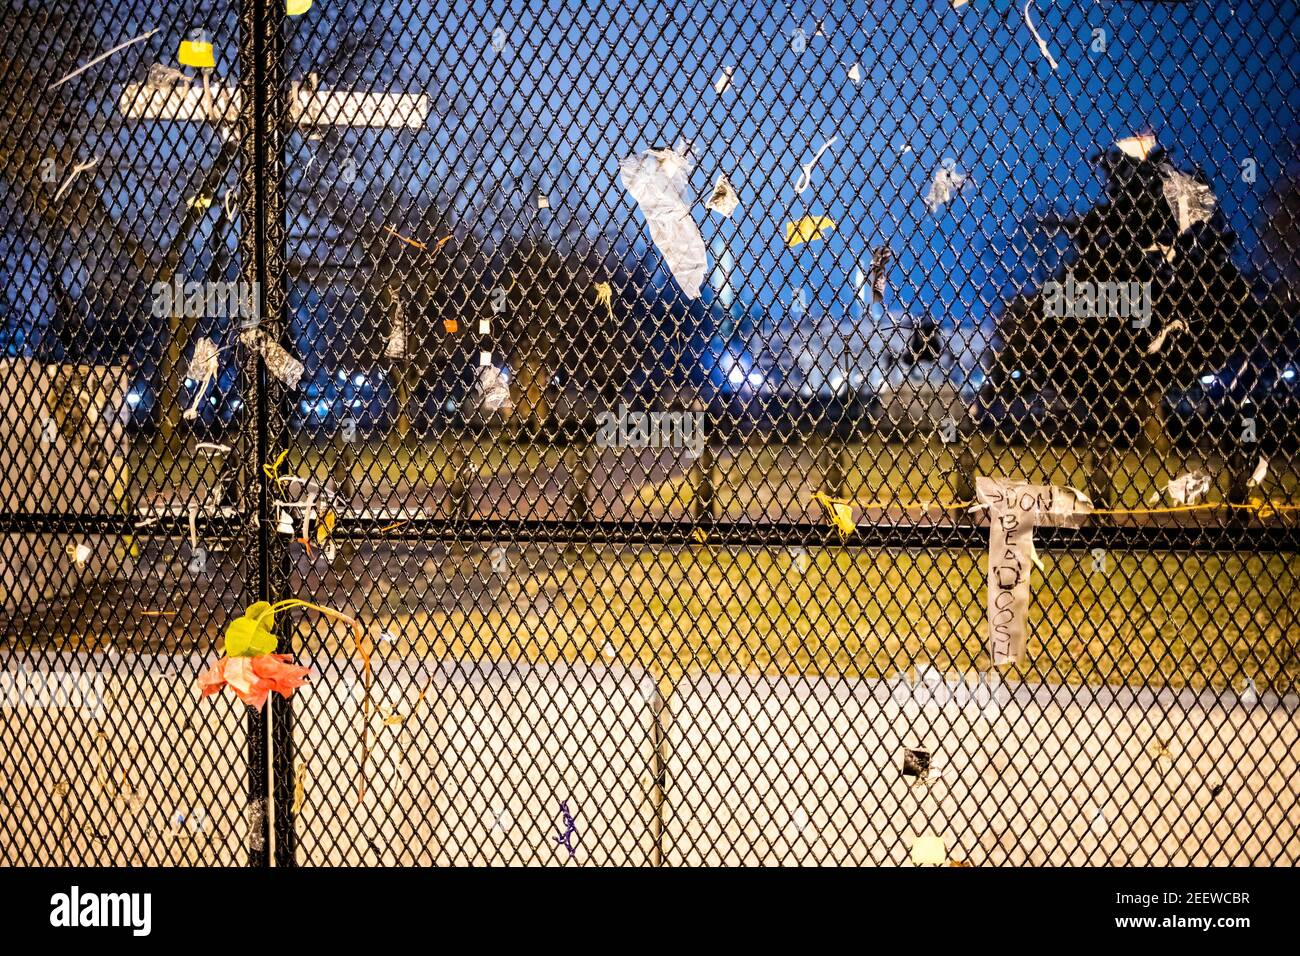 Security fence surrounds White house building after Capitol Hill riots, at night Stock Photo